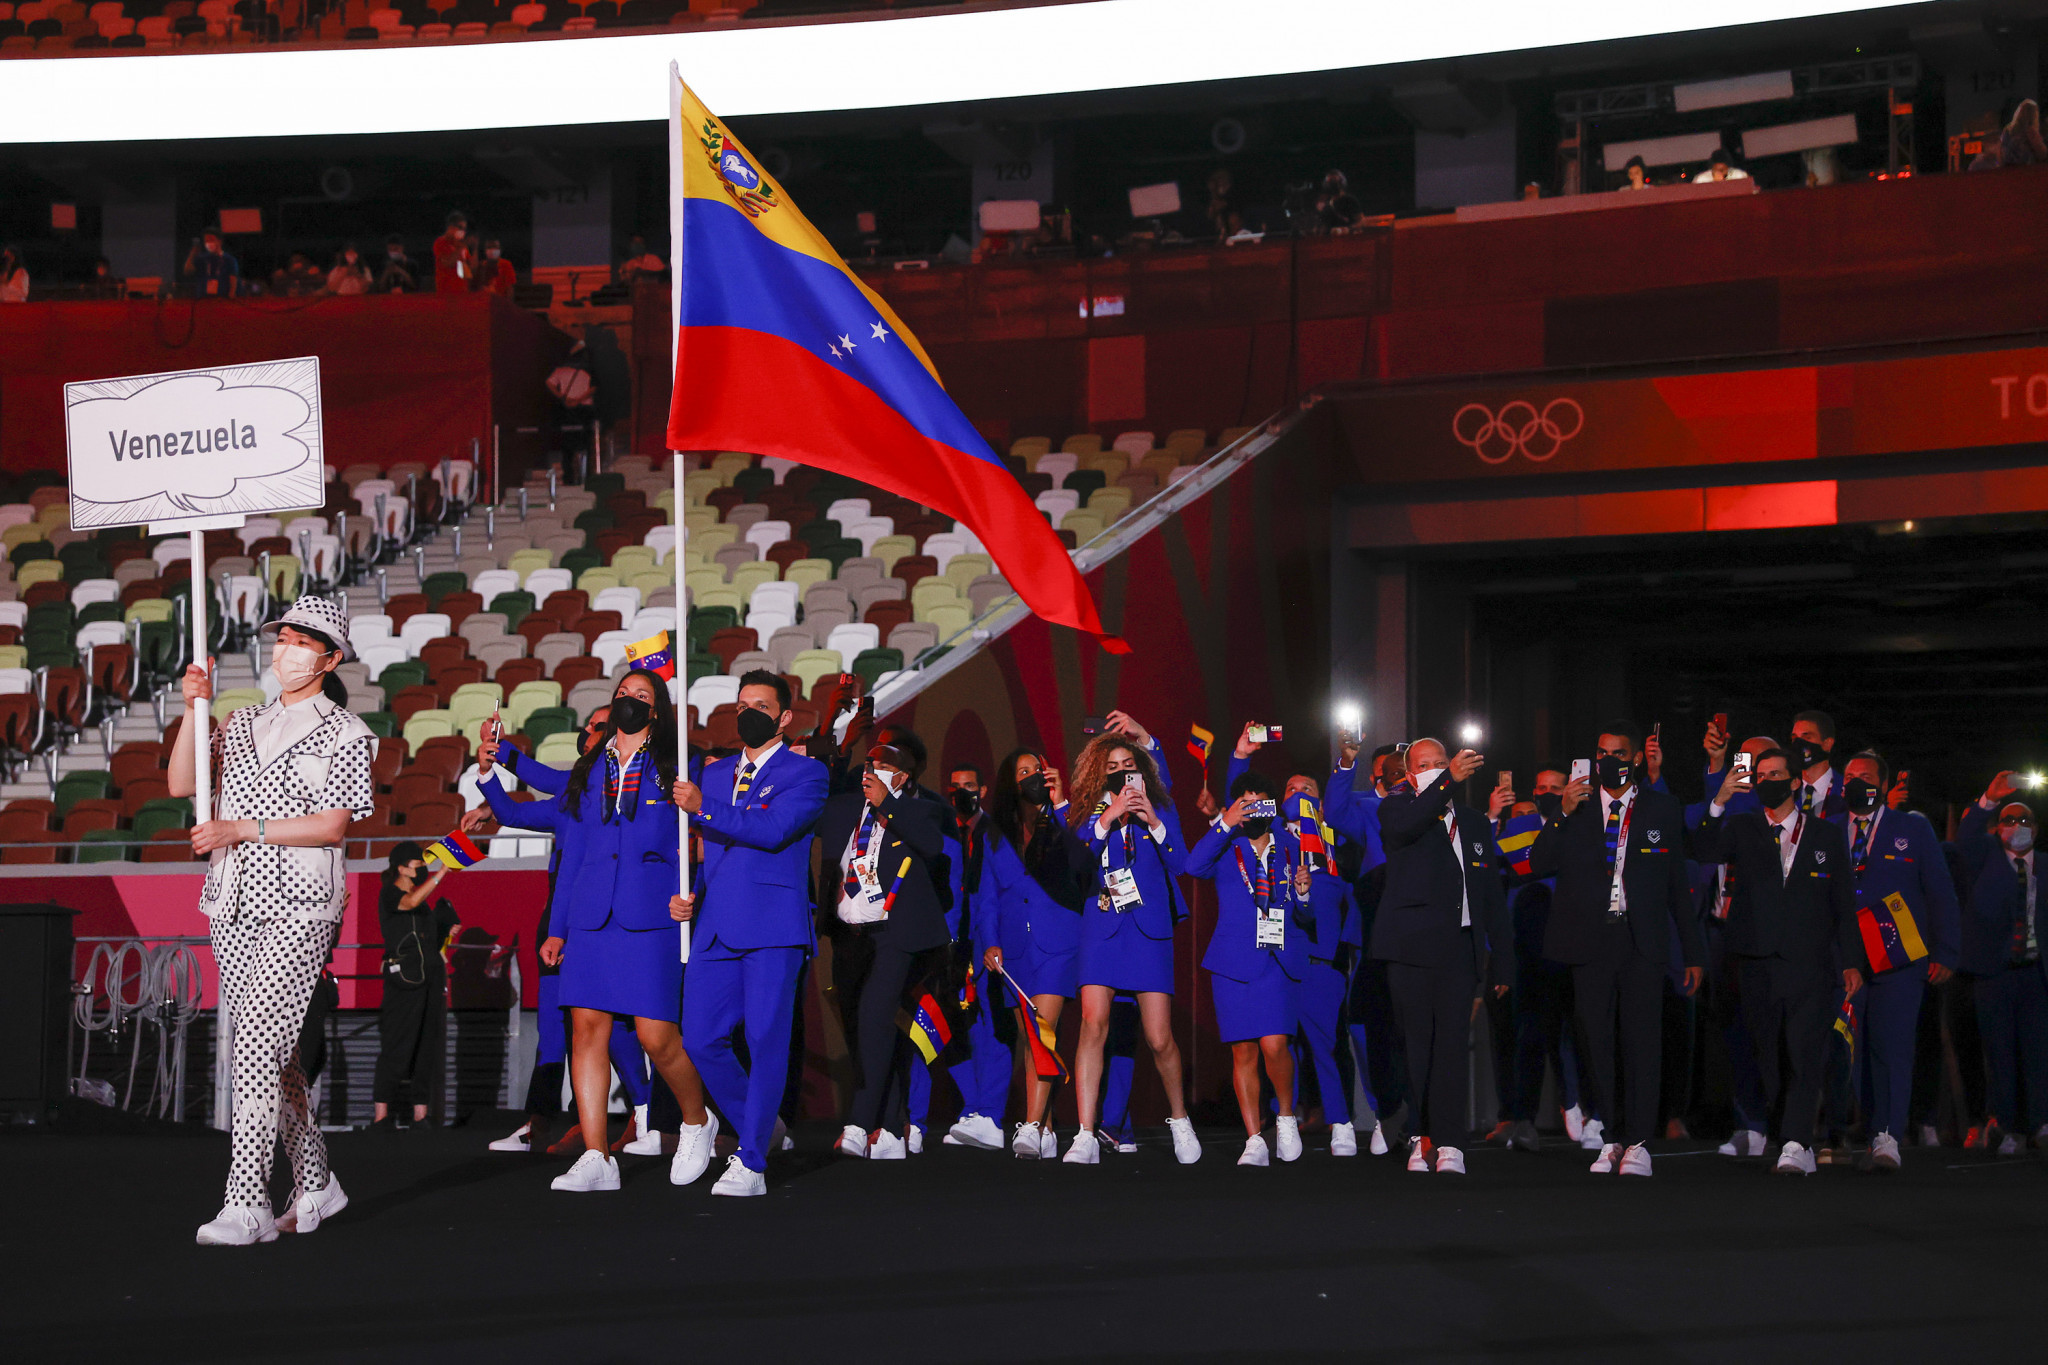 A delegation from the Venezuelan Olympic Committee met with IOC officials in Lausanne ©Getty Images